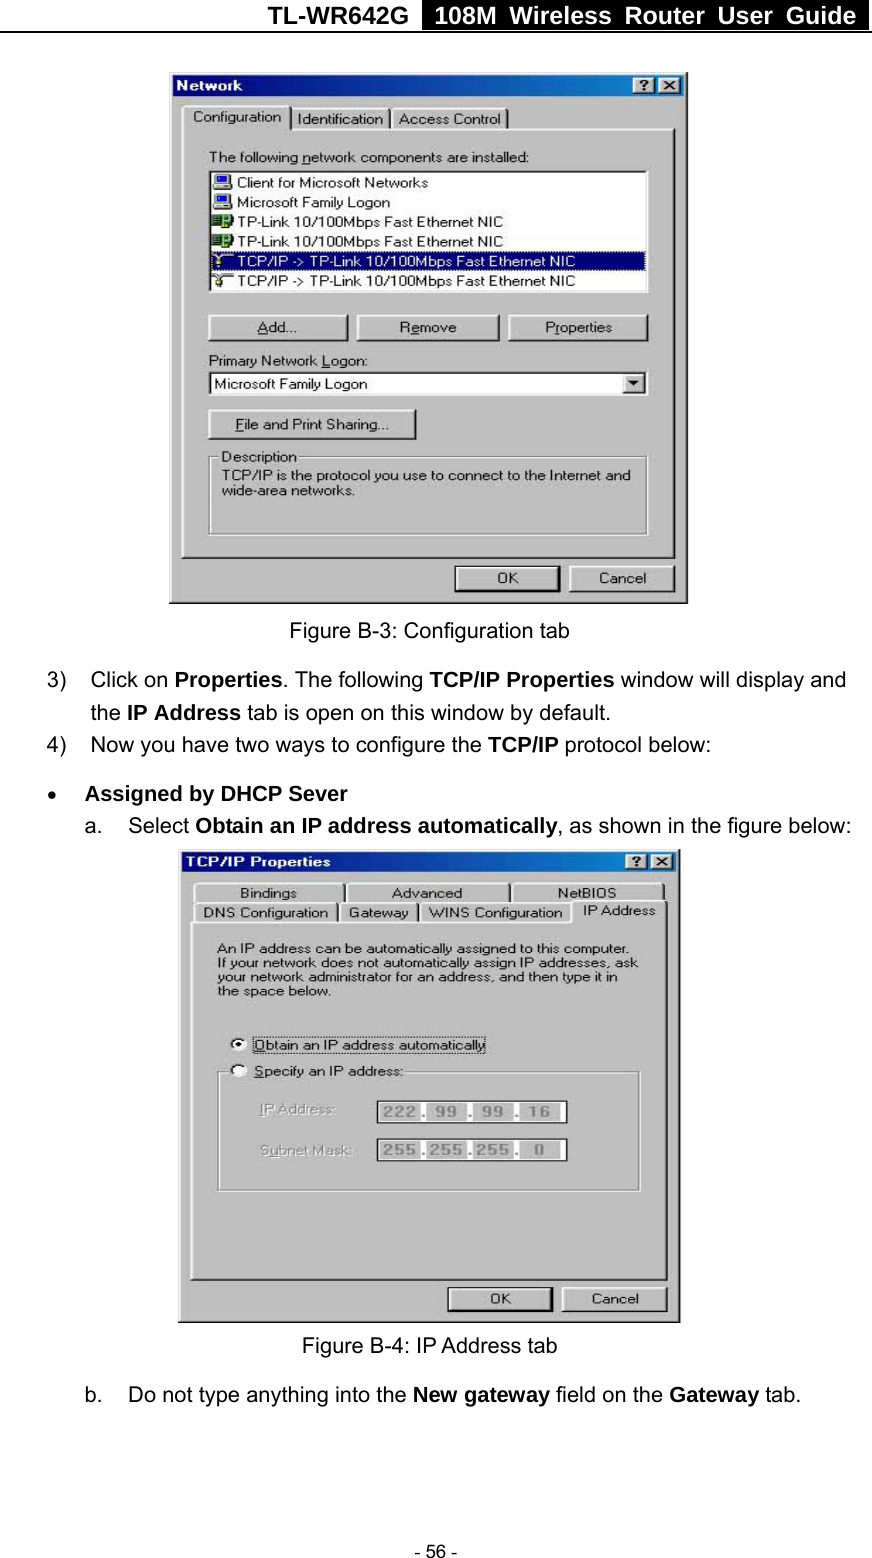 TL-WR642G   108M Wireless Router User Guide   - 56 -  Figure B-3: Configuration tab 3) Click on Properties. The following TCP/IP Properties window will display and the IP Address tab is open on this window by default. 4)  Now you have two ways to configure the TCP/IP protocol below: • Assigned by DHCP Sever a. Select Obtain an IP address automatically, as shown in the figure below:  Figure B-4: IP Address tab b.  Do not type anything into the New gateway field on the Gateway tab.   